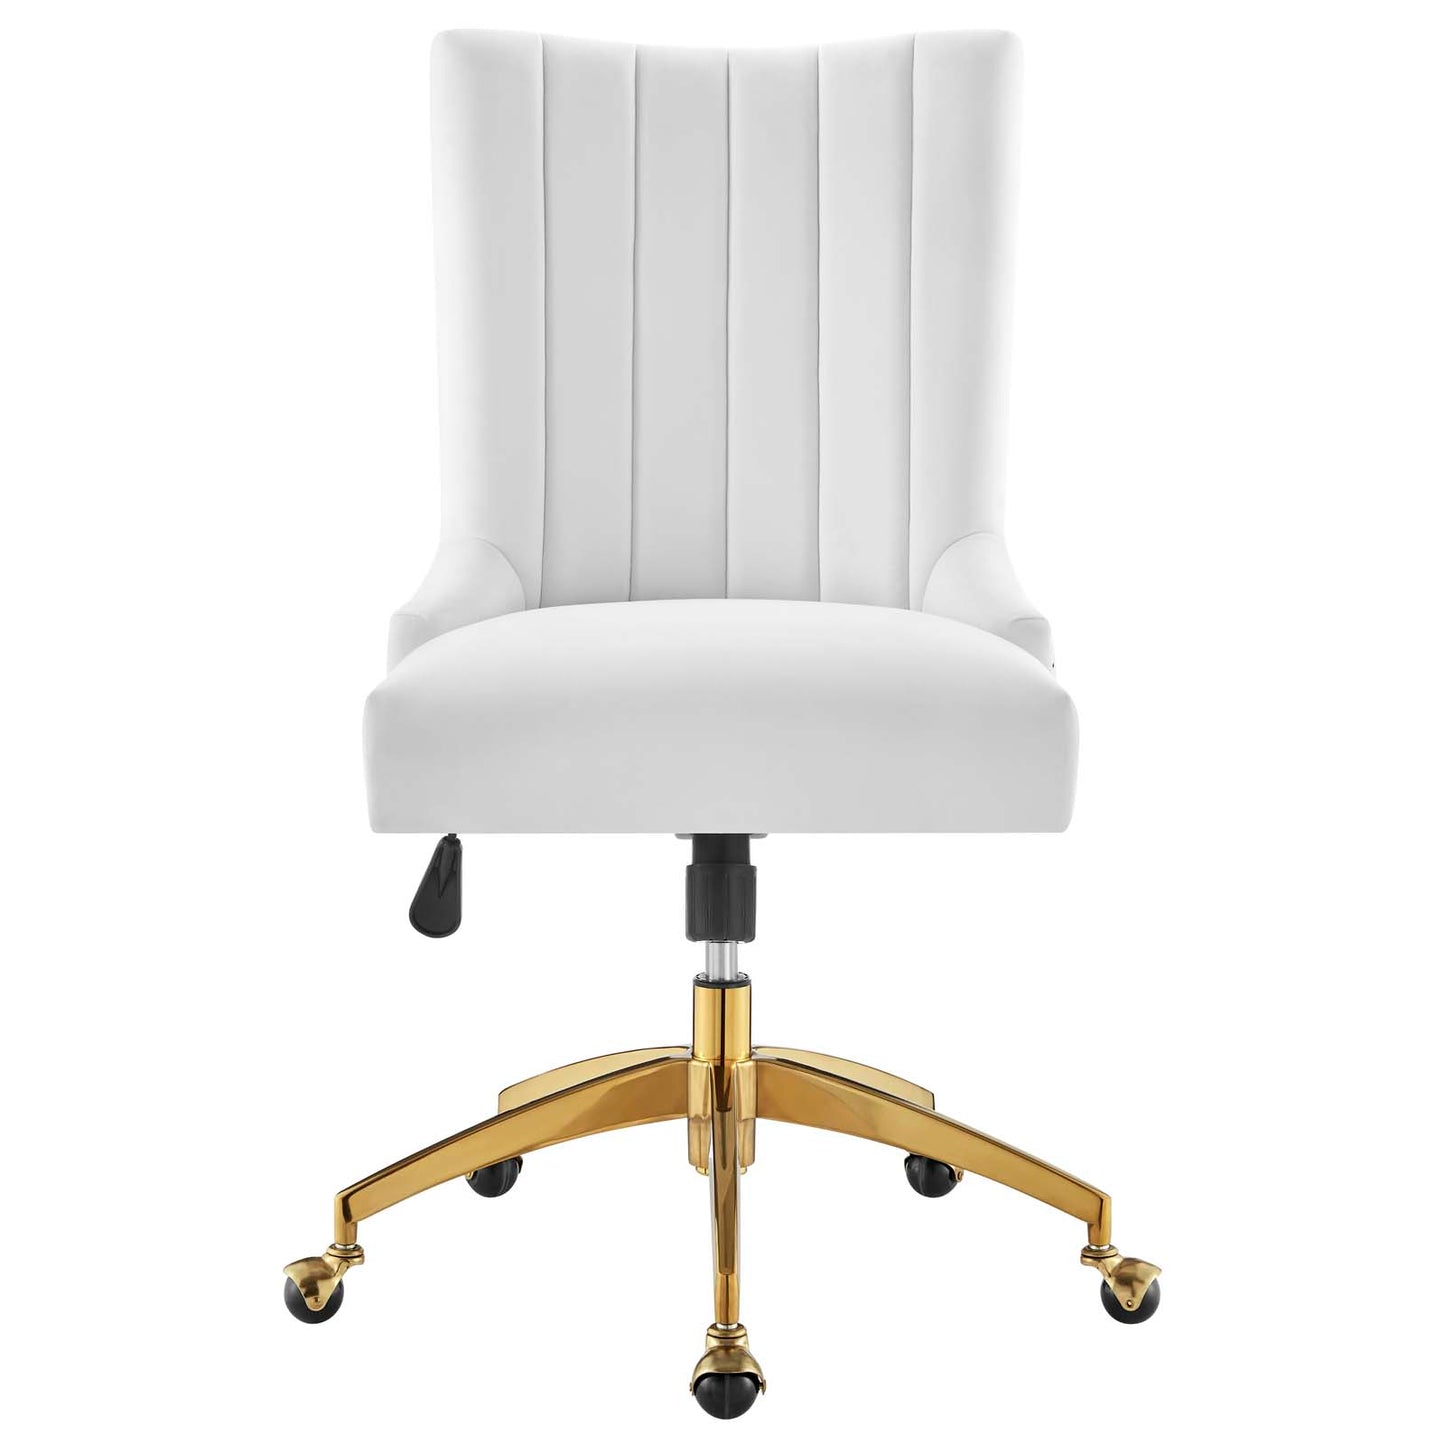 Empower Channel Tufted Performance Velvet Office Chair Gold White EEI-4575-GLD-WHI